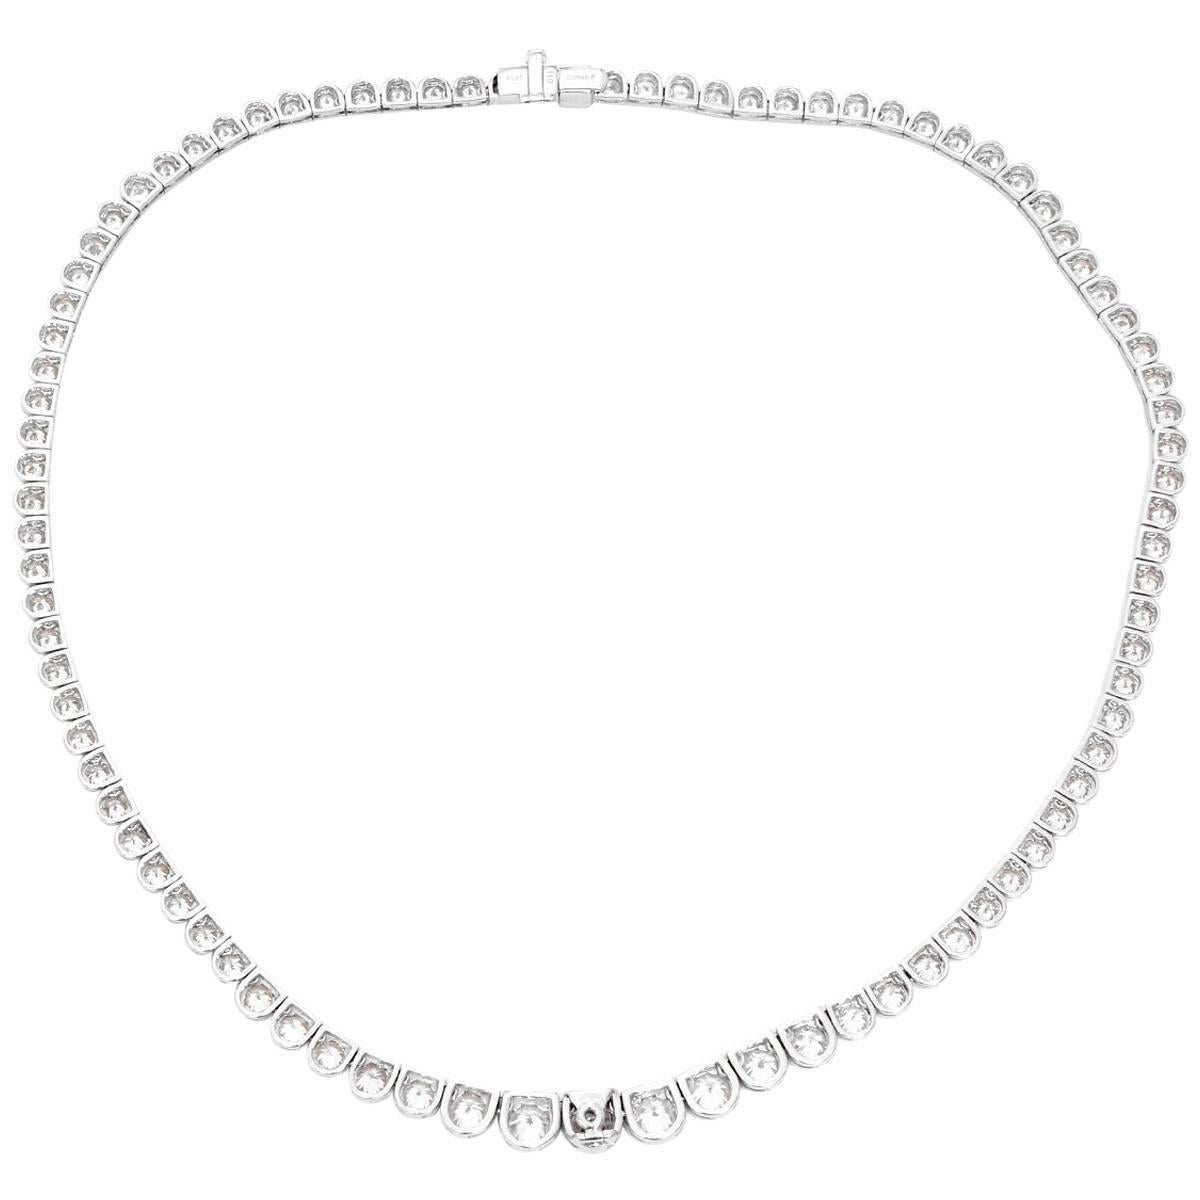 Sophia D. Platinum Mounting Diamond Necklace - . This is stunning 14.5cts necklace with HIVS2 and SI1  diamonds. Hallmark signature Sophia D. PLAT. . Total weight 37.3 grams.  Princess length at 18